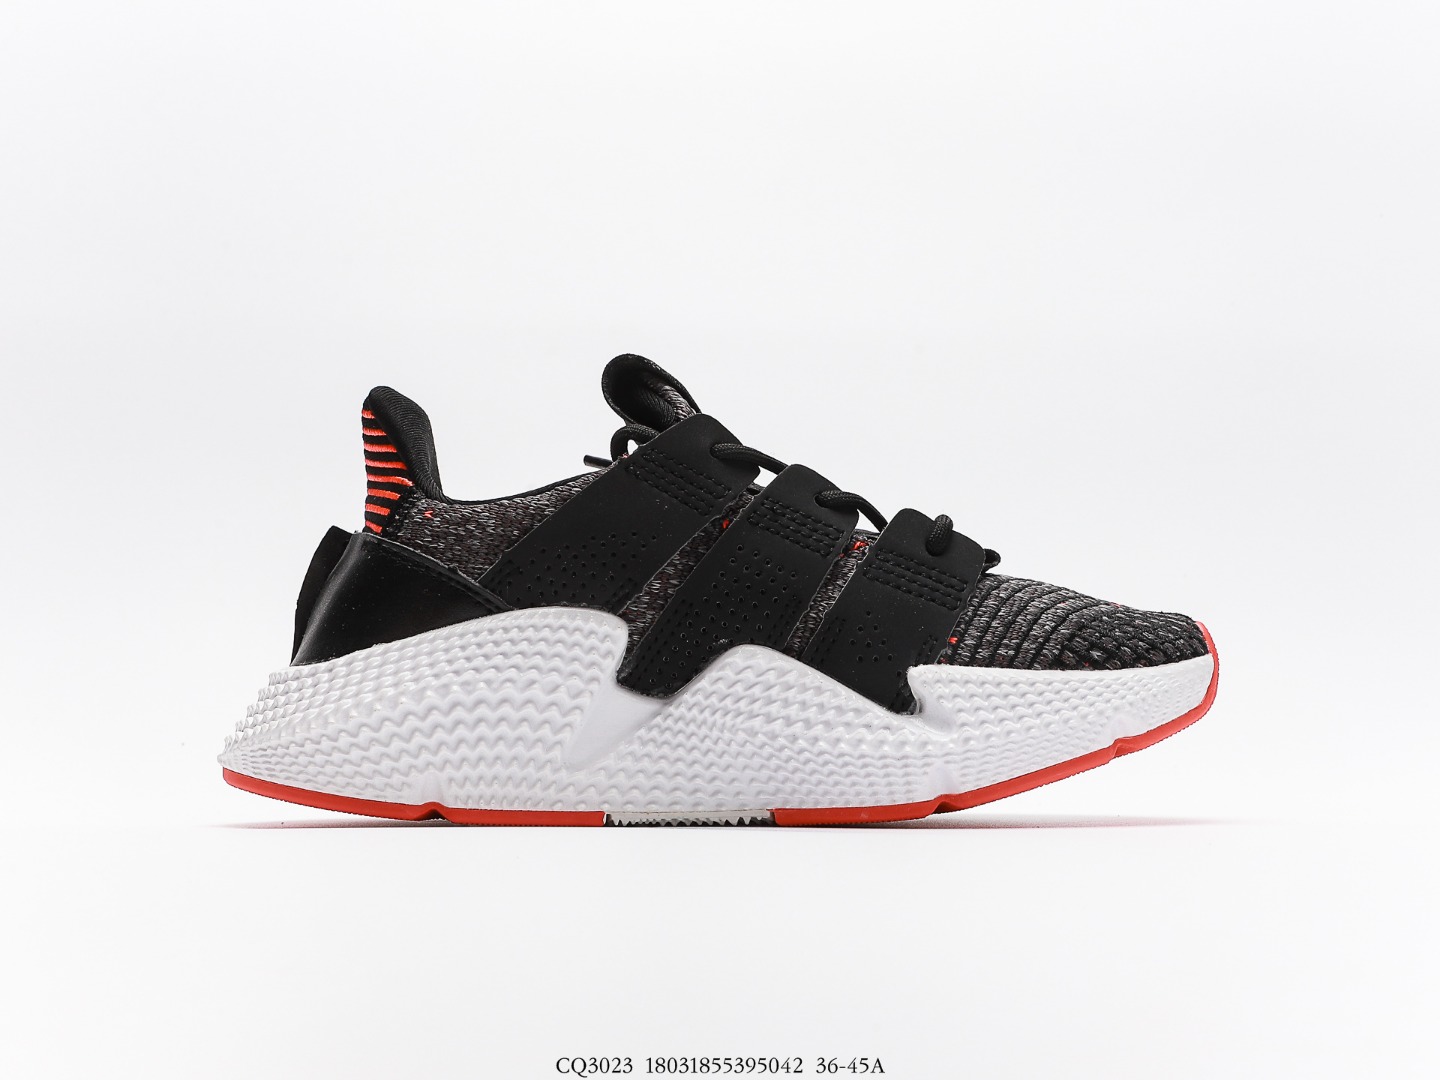 Giày Adidas Prophere Core Black Infrared Rep 1:1